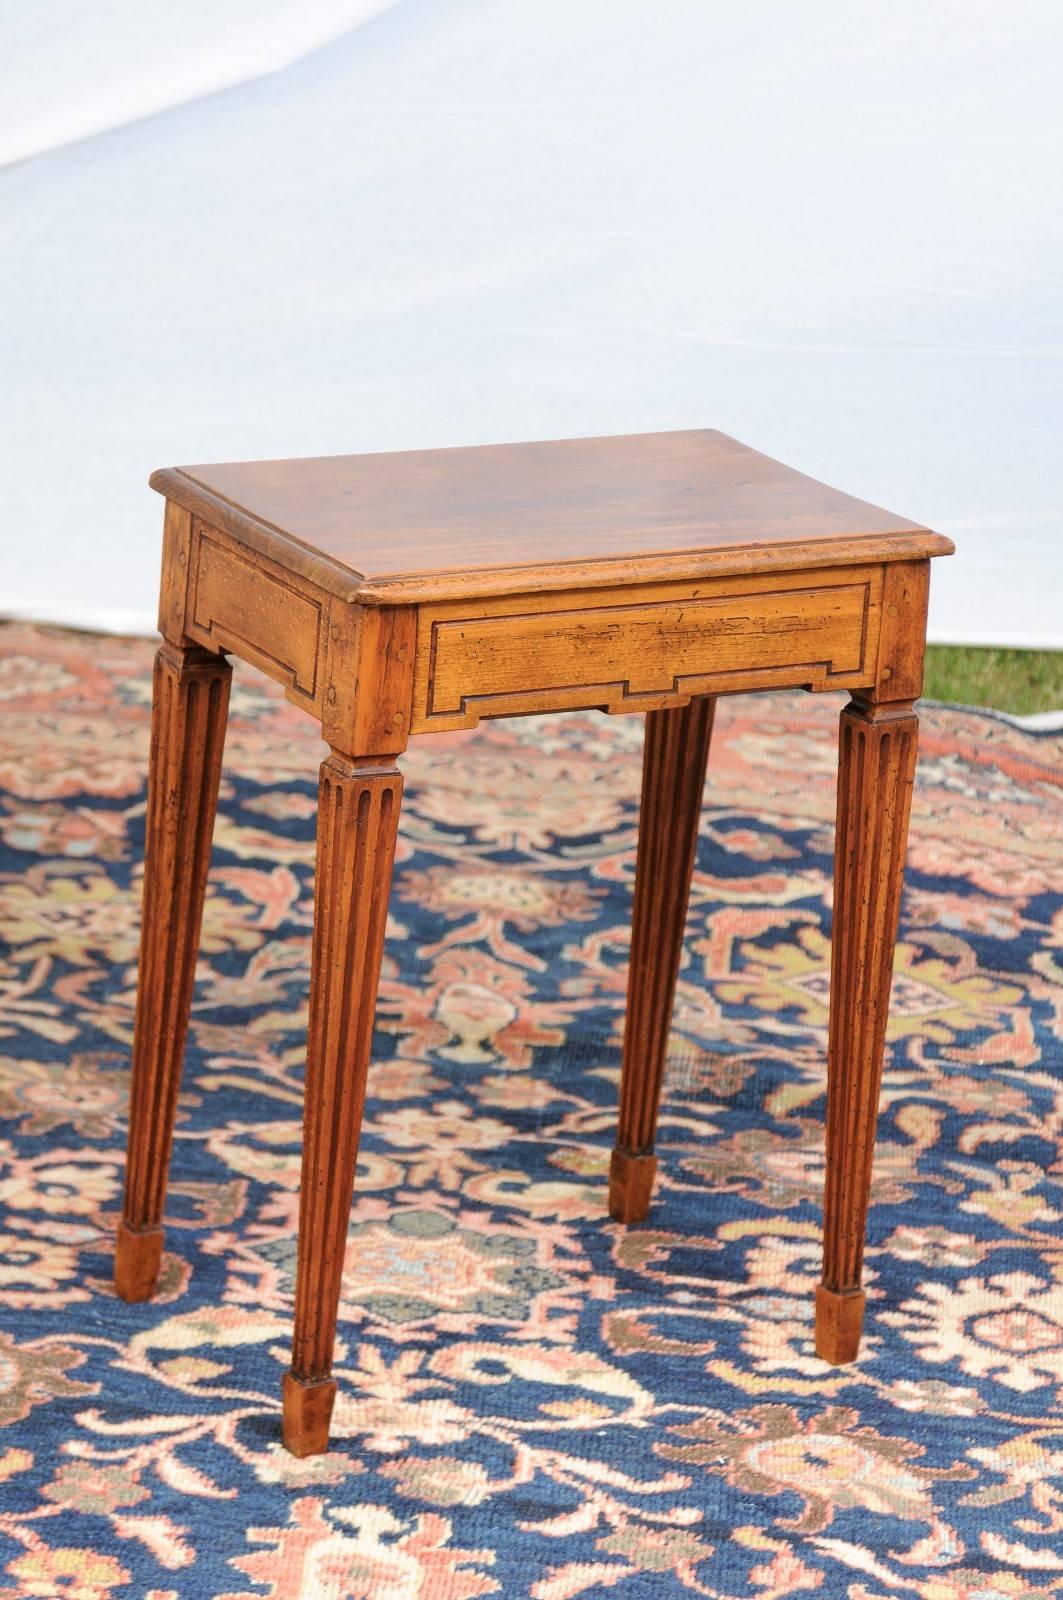 This petite French oak and walnut side table from the late 19th century features a rectangular tilt-top with rounded edge over a geometrically carved apron on all sides. This low relief carving brings a sense of simplicity. The small size table is